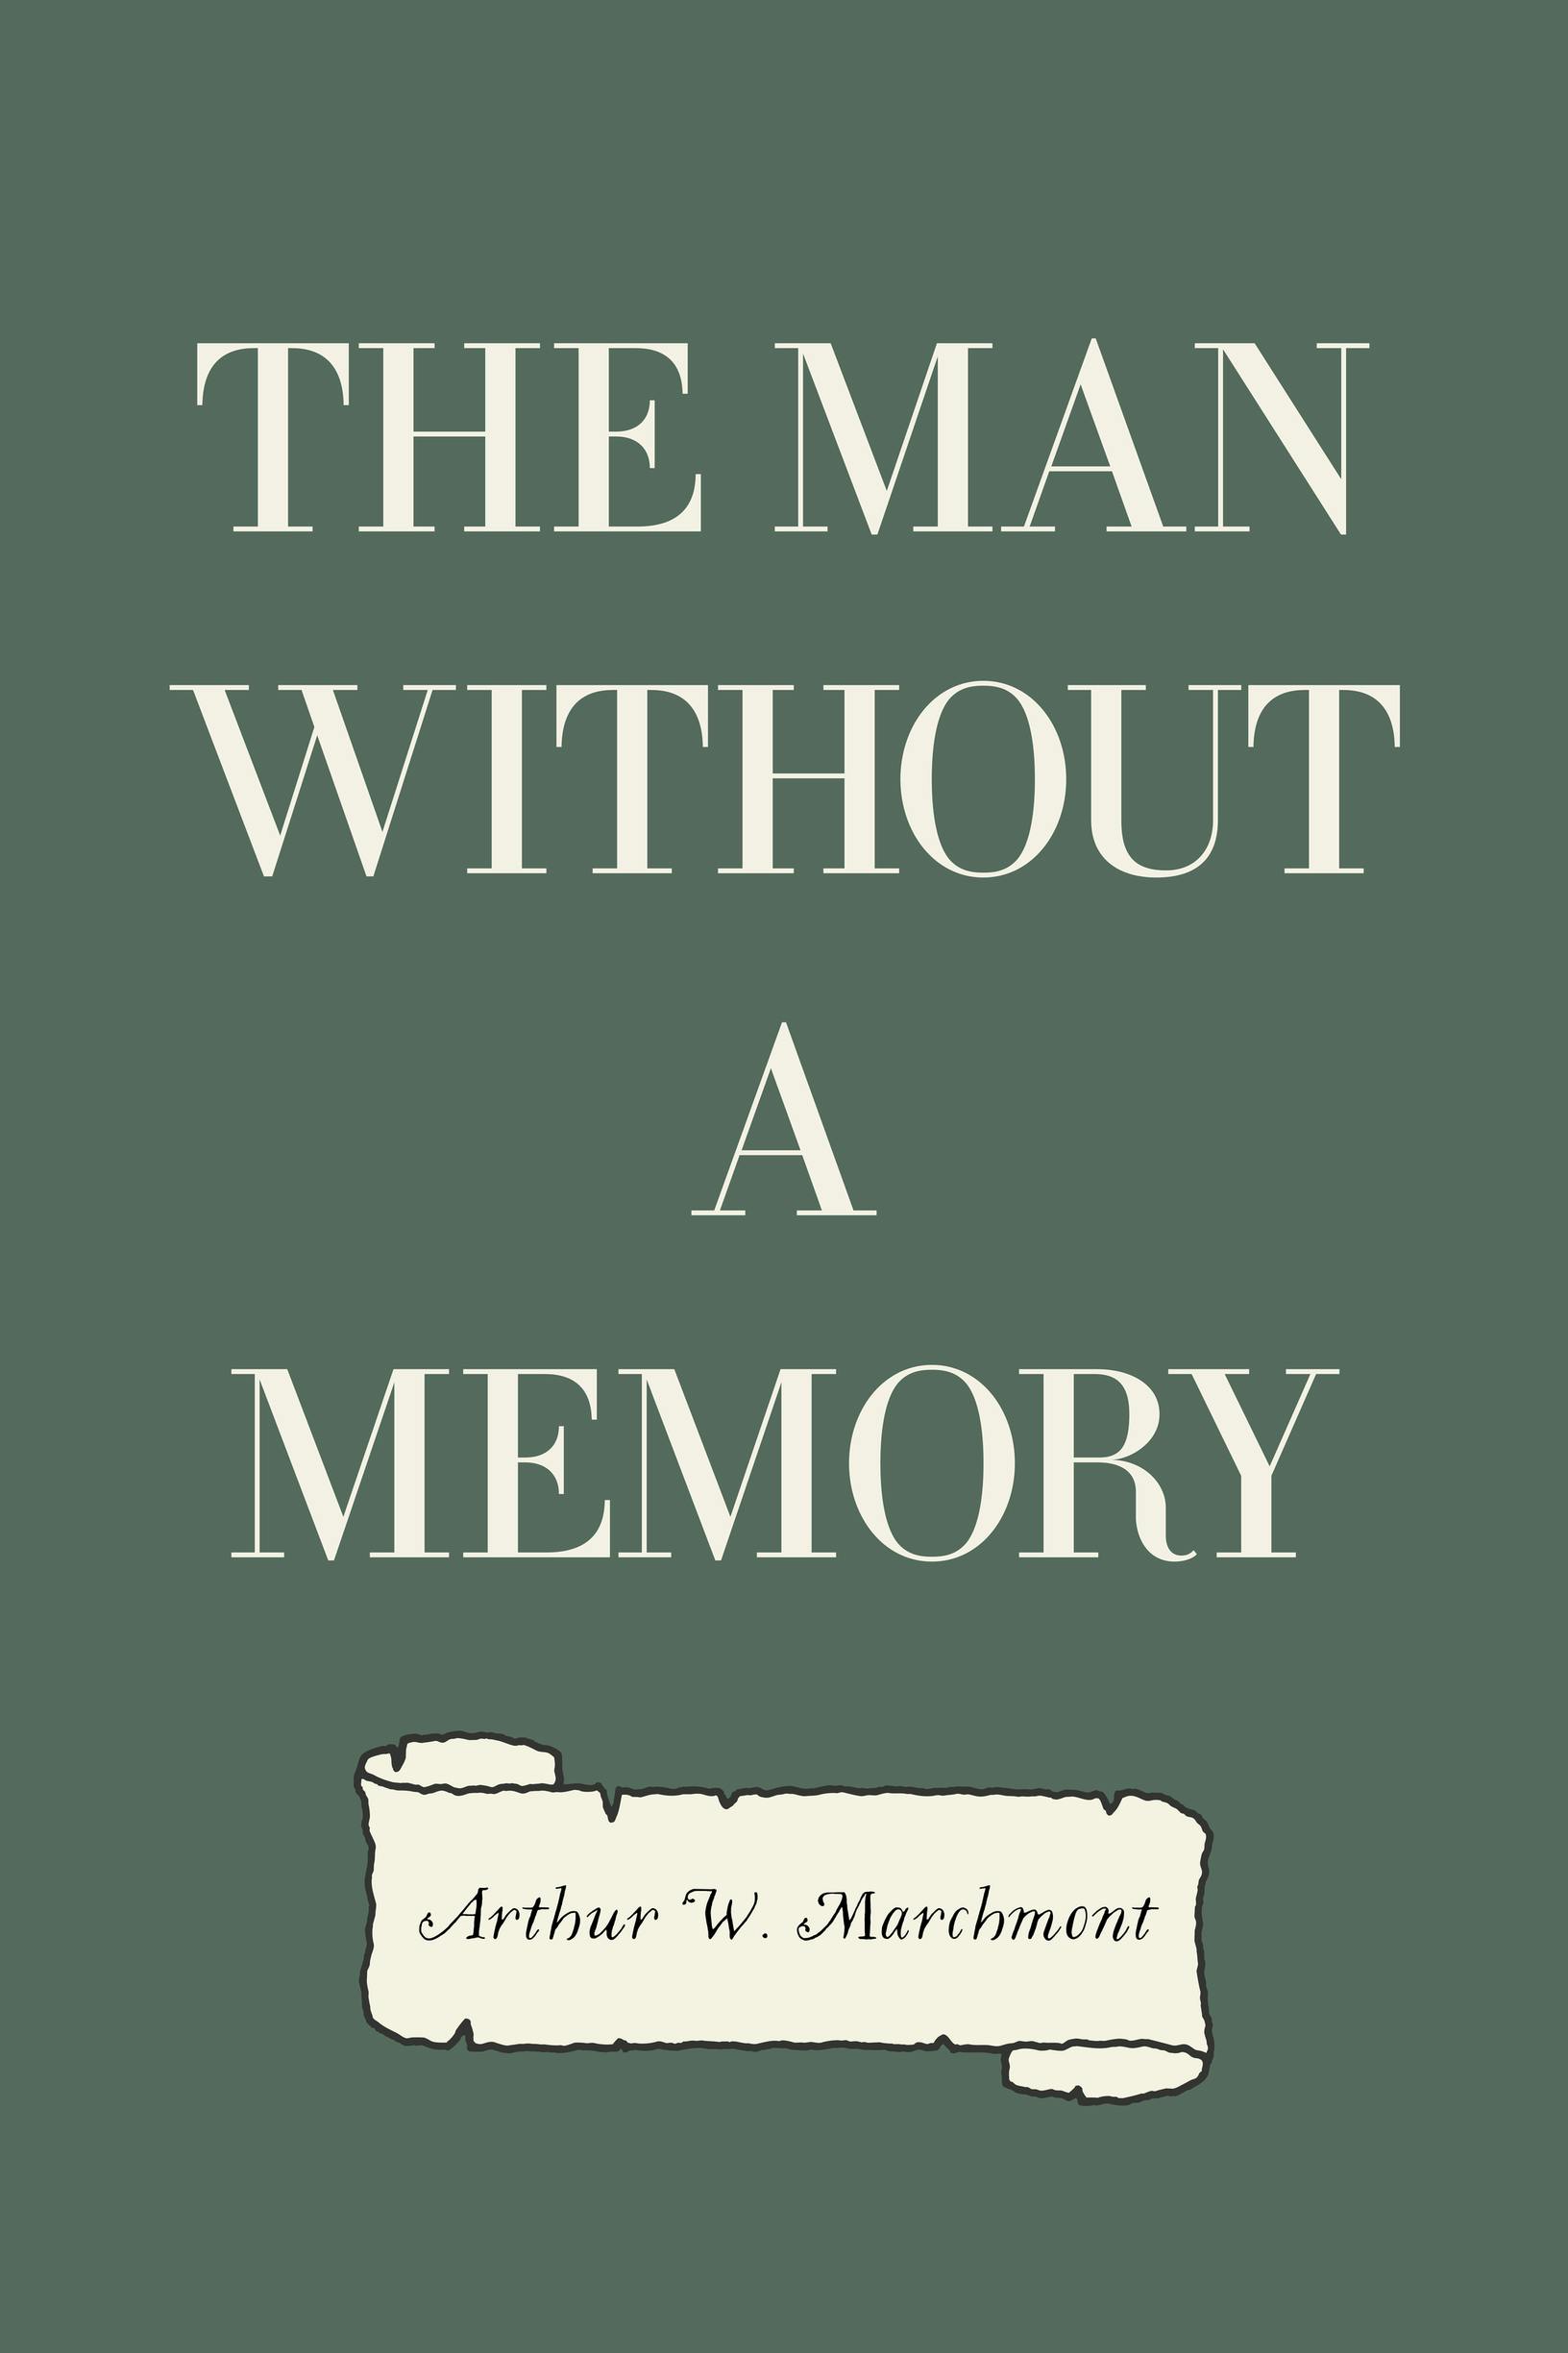 The Man Without a Memory - Arthur W. Marchmont